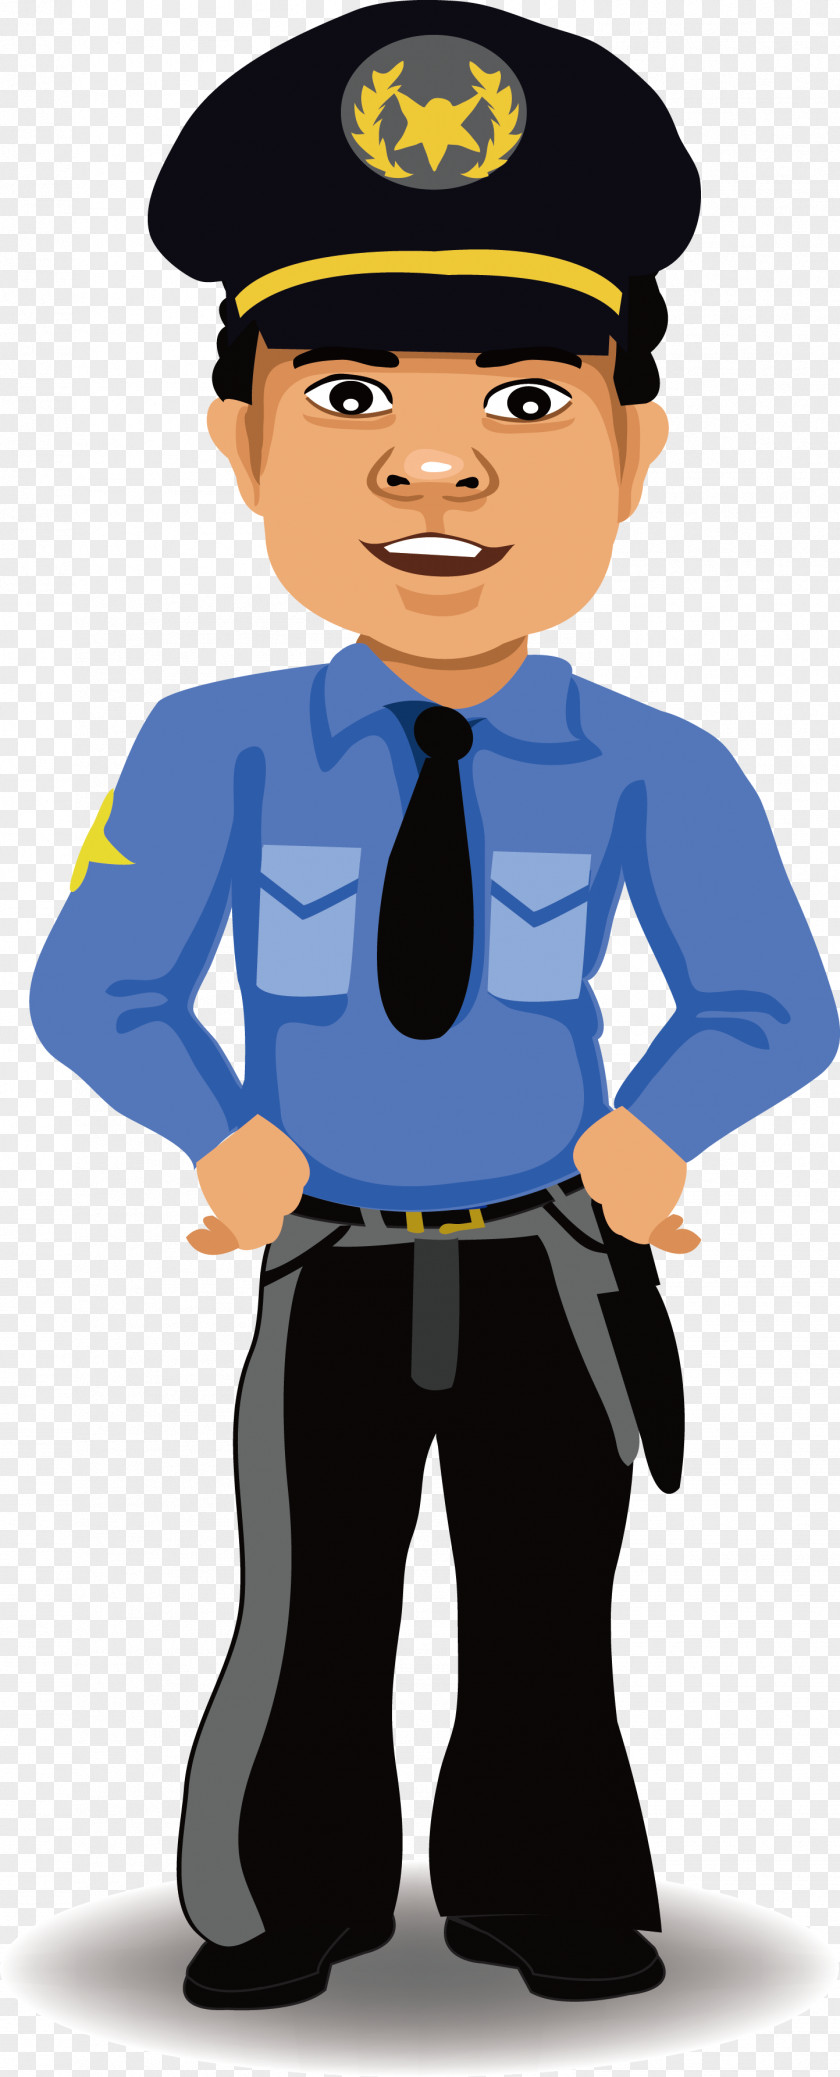 People's Police Vector Officer Cartoon Security PNG